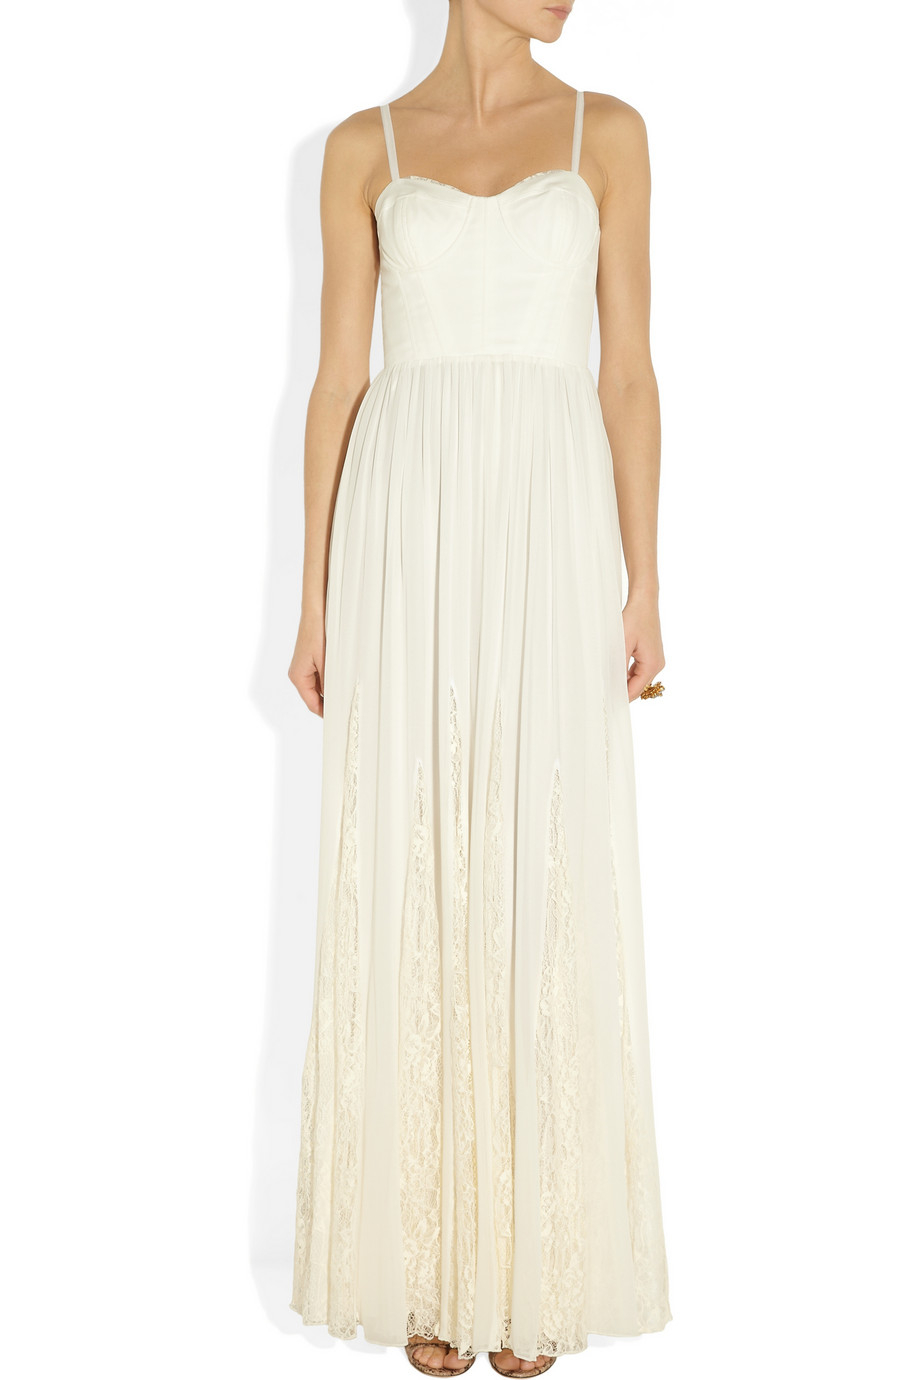 Alice + olivia Zack Cottonblend Lace Dress in White | Lyst